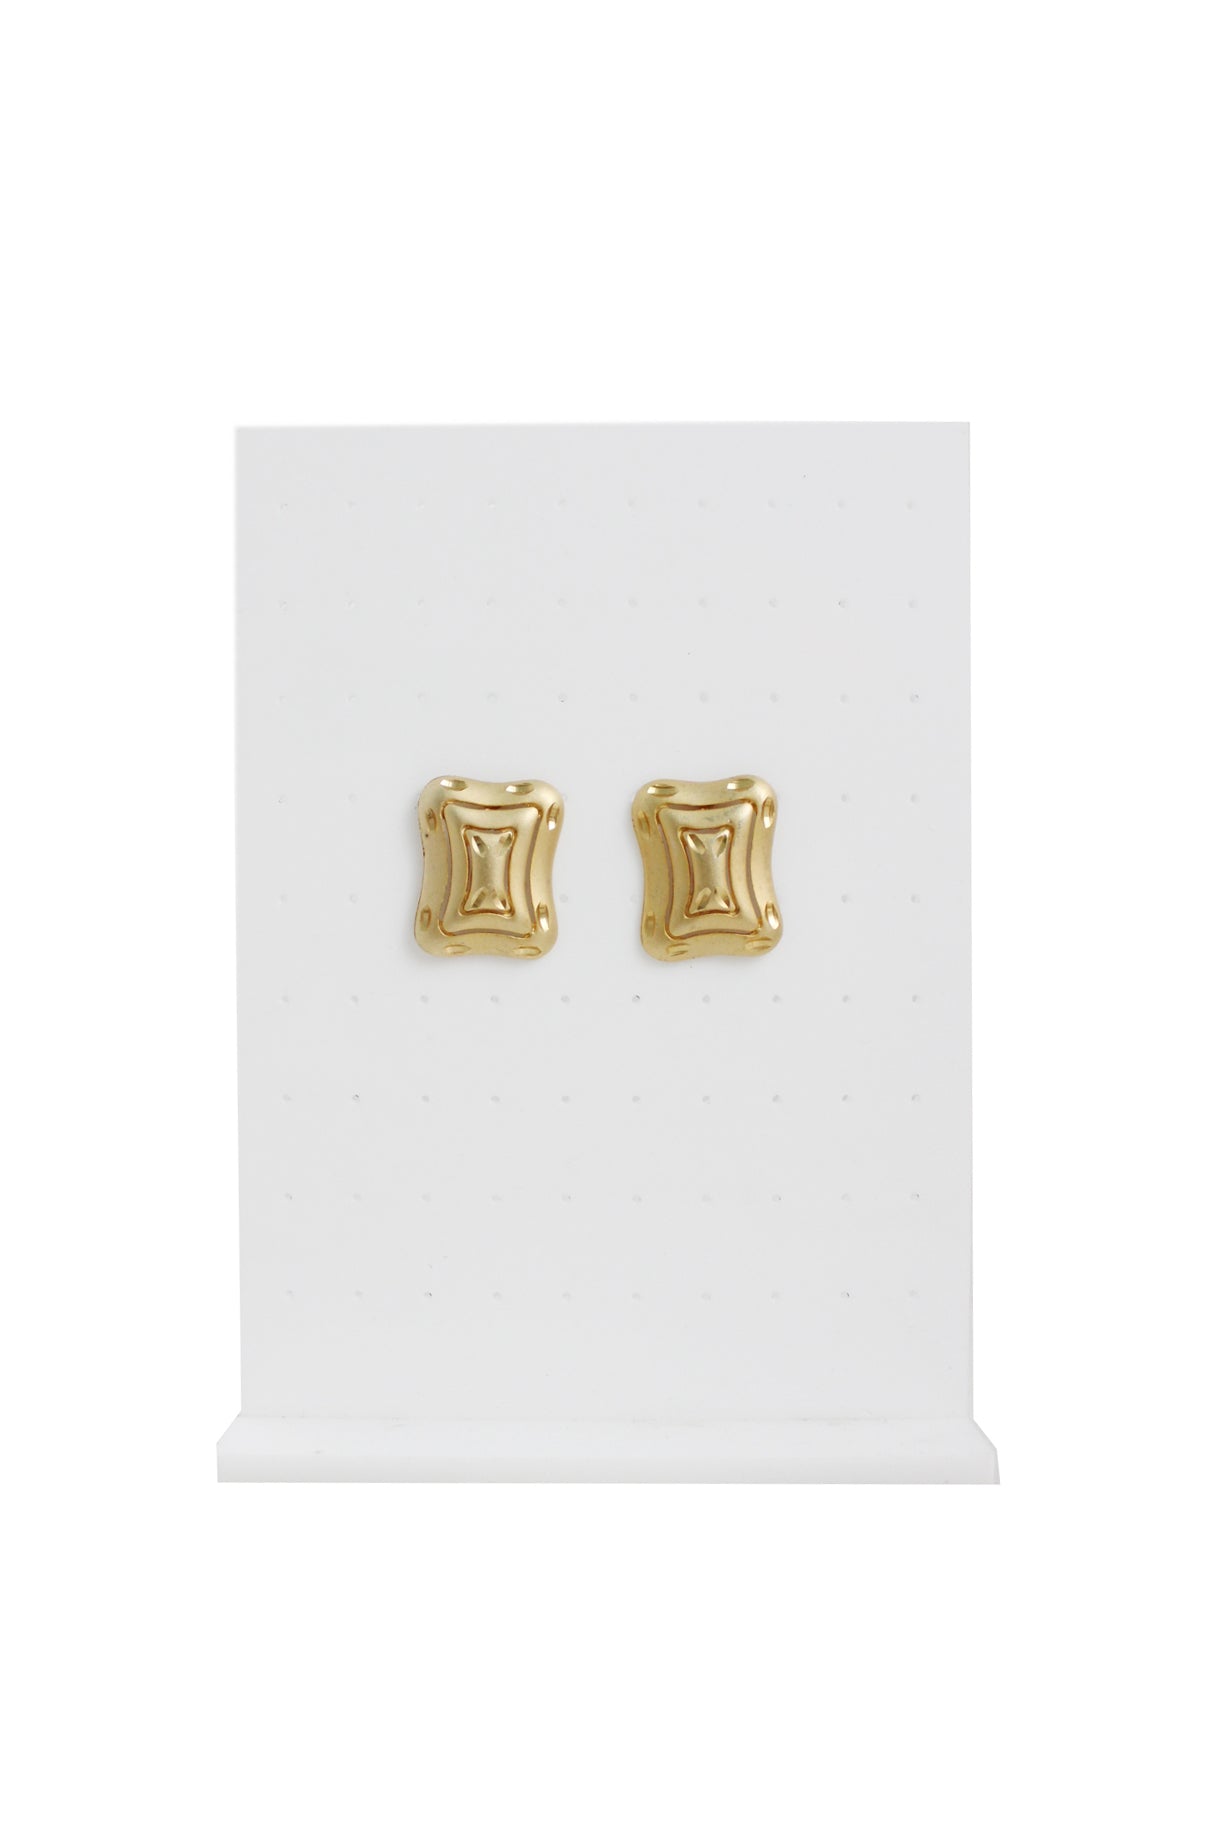 vintage gold toned metallic rectangular earrings staged on earrings stand. 